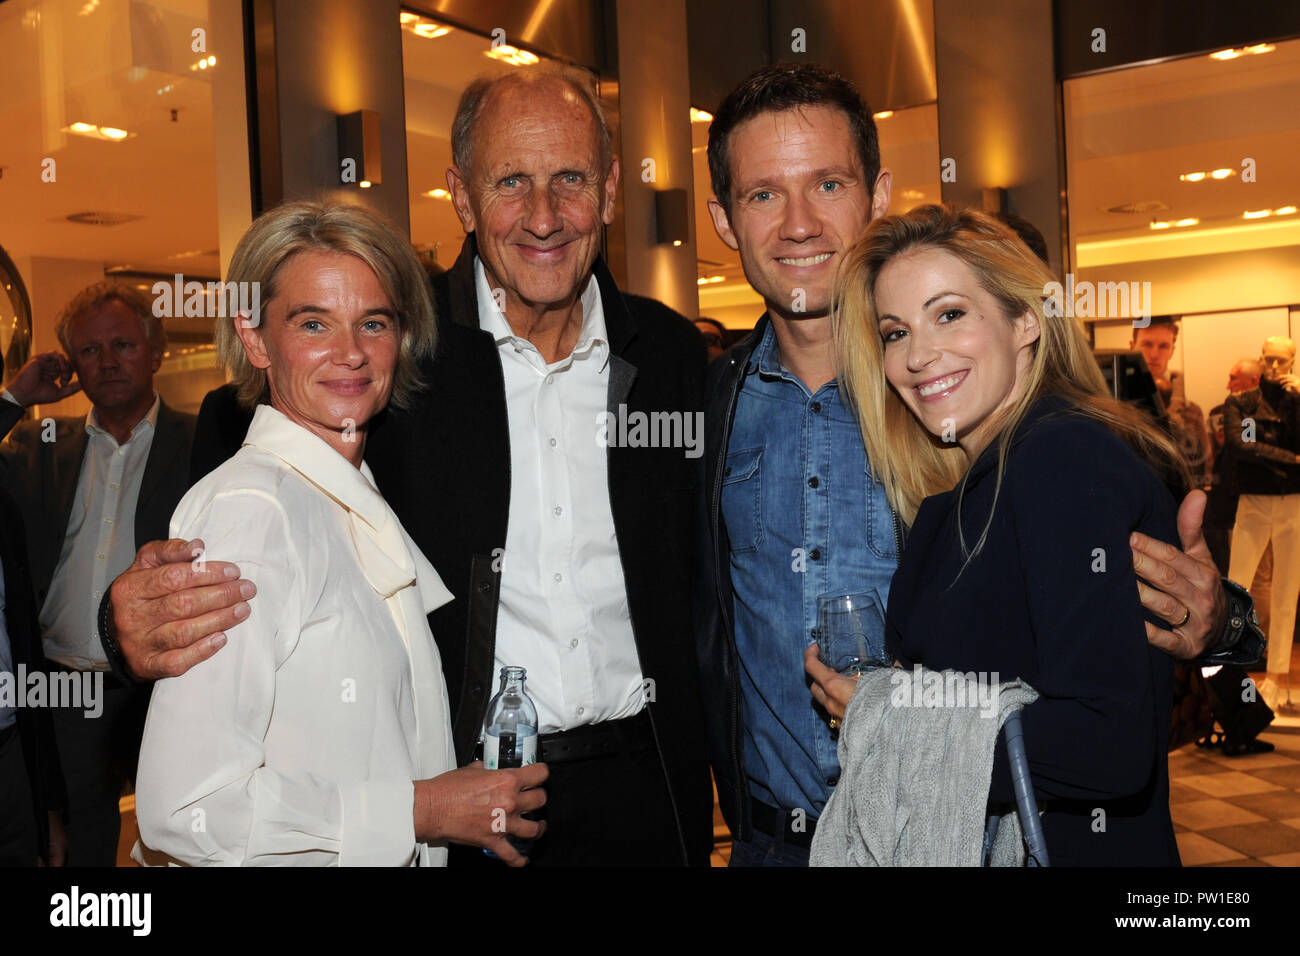 Munich, Bavaria. 11th Oct, 2018. Formula 1 racer Joachim Stuck (2nd from left), his wife Uschi (L) and presenter Andrea Kaiser with husband, the former rally driver Sebastian Ogier, arriving to the cocktail party on the occasion of the presentation of the Bogner winter collection 2018/19 in the Bogner Haus in the Residenzstrasse. Credit: Ursula Düren/dpa/Alamy Live News Stock Photo